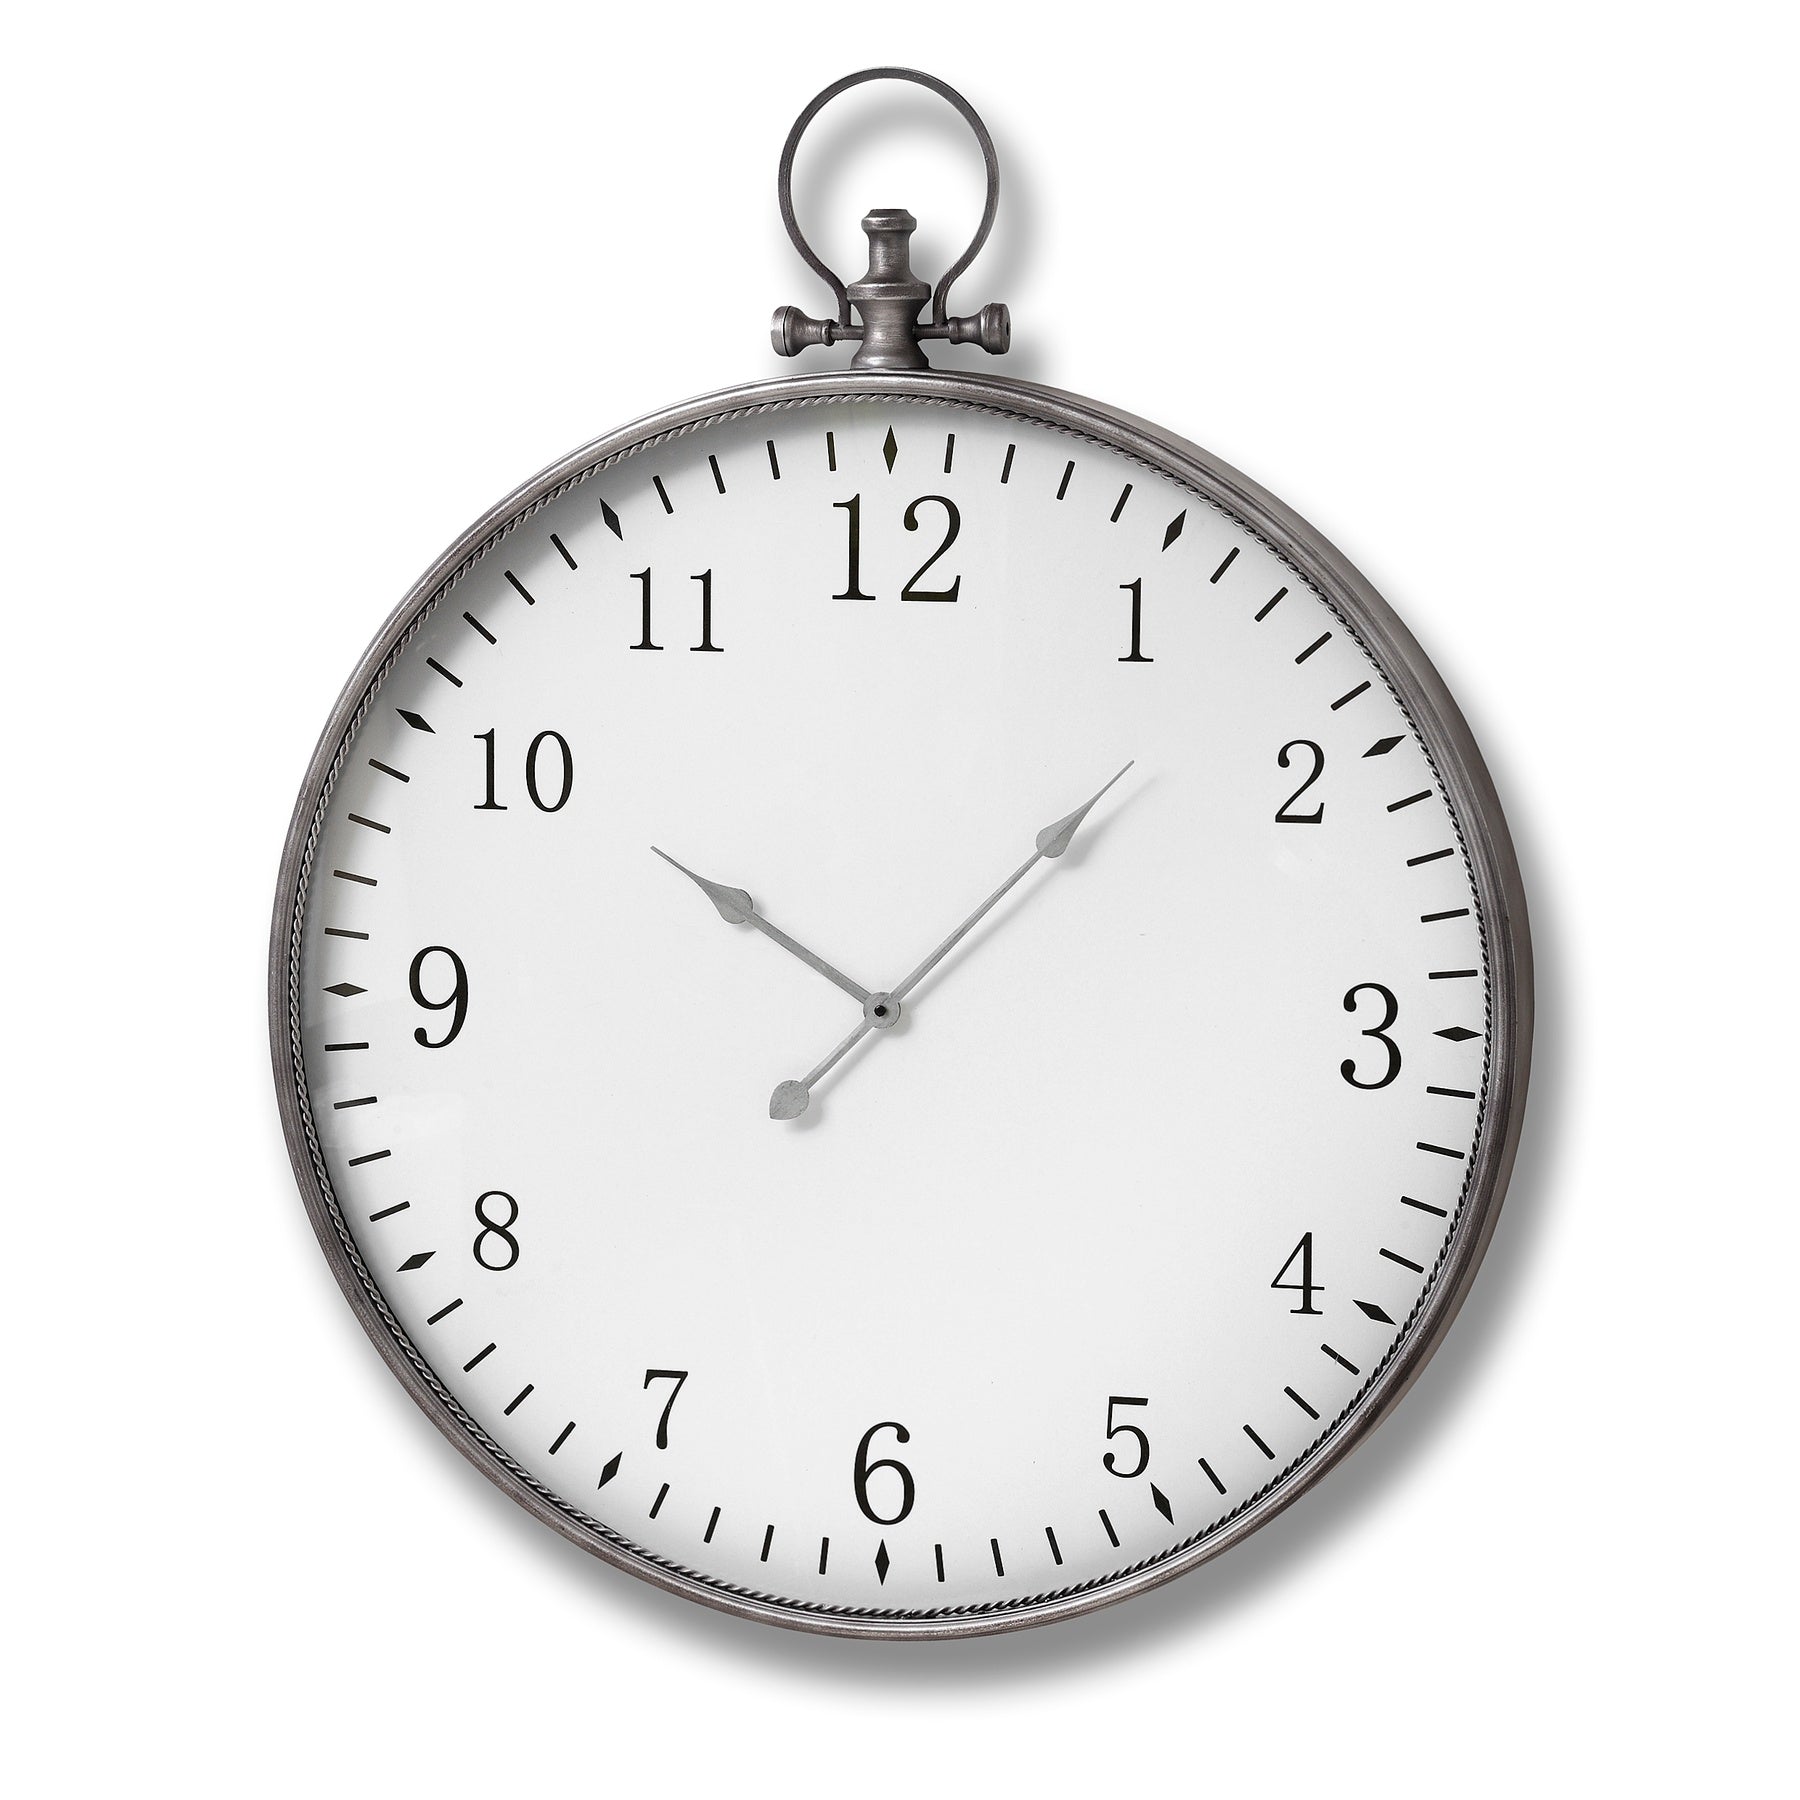 View Silver Pocket Watch Wall Clock information